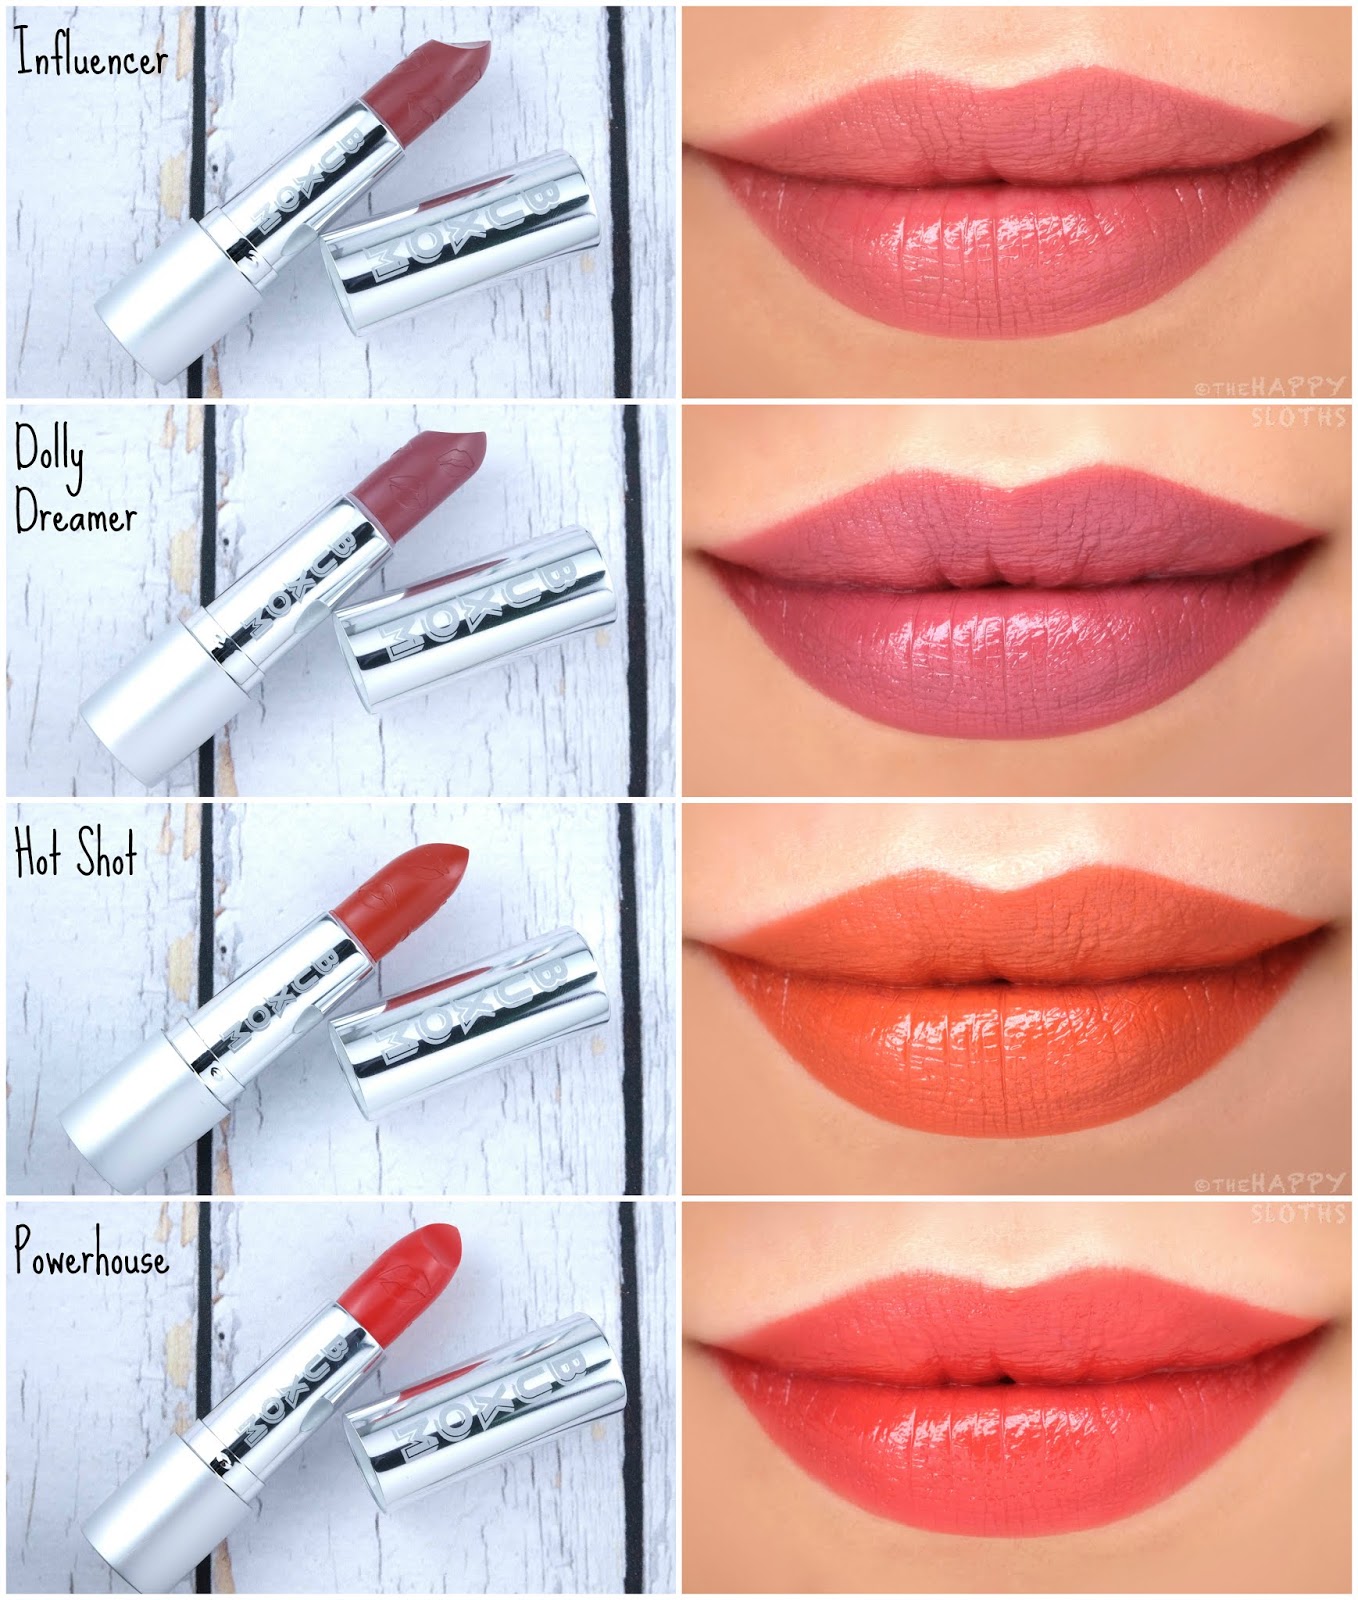 Buxom | Full Force Plumping Lipstick in "Influencer", "Dolly Dreamer", "Hot Shot" & "Powerhouse": Review and Swatches